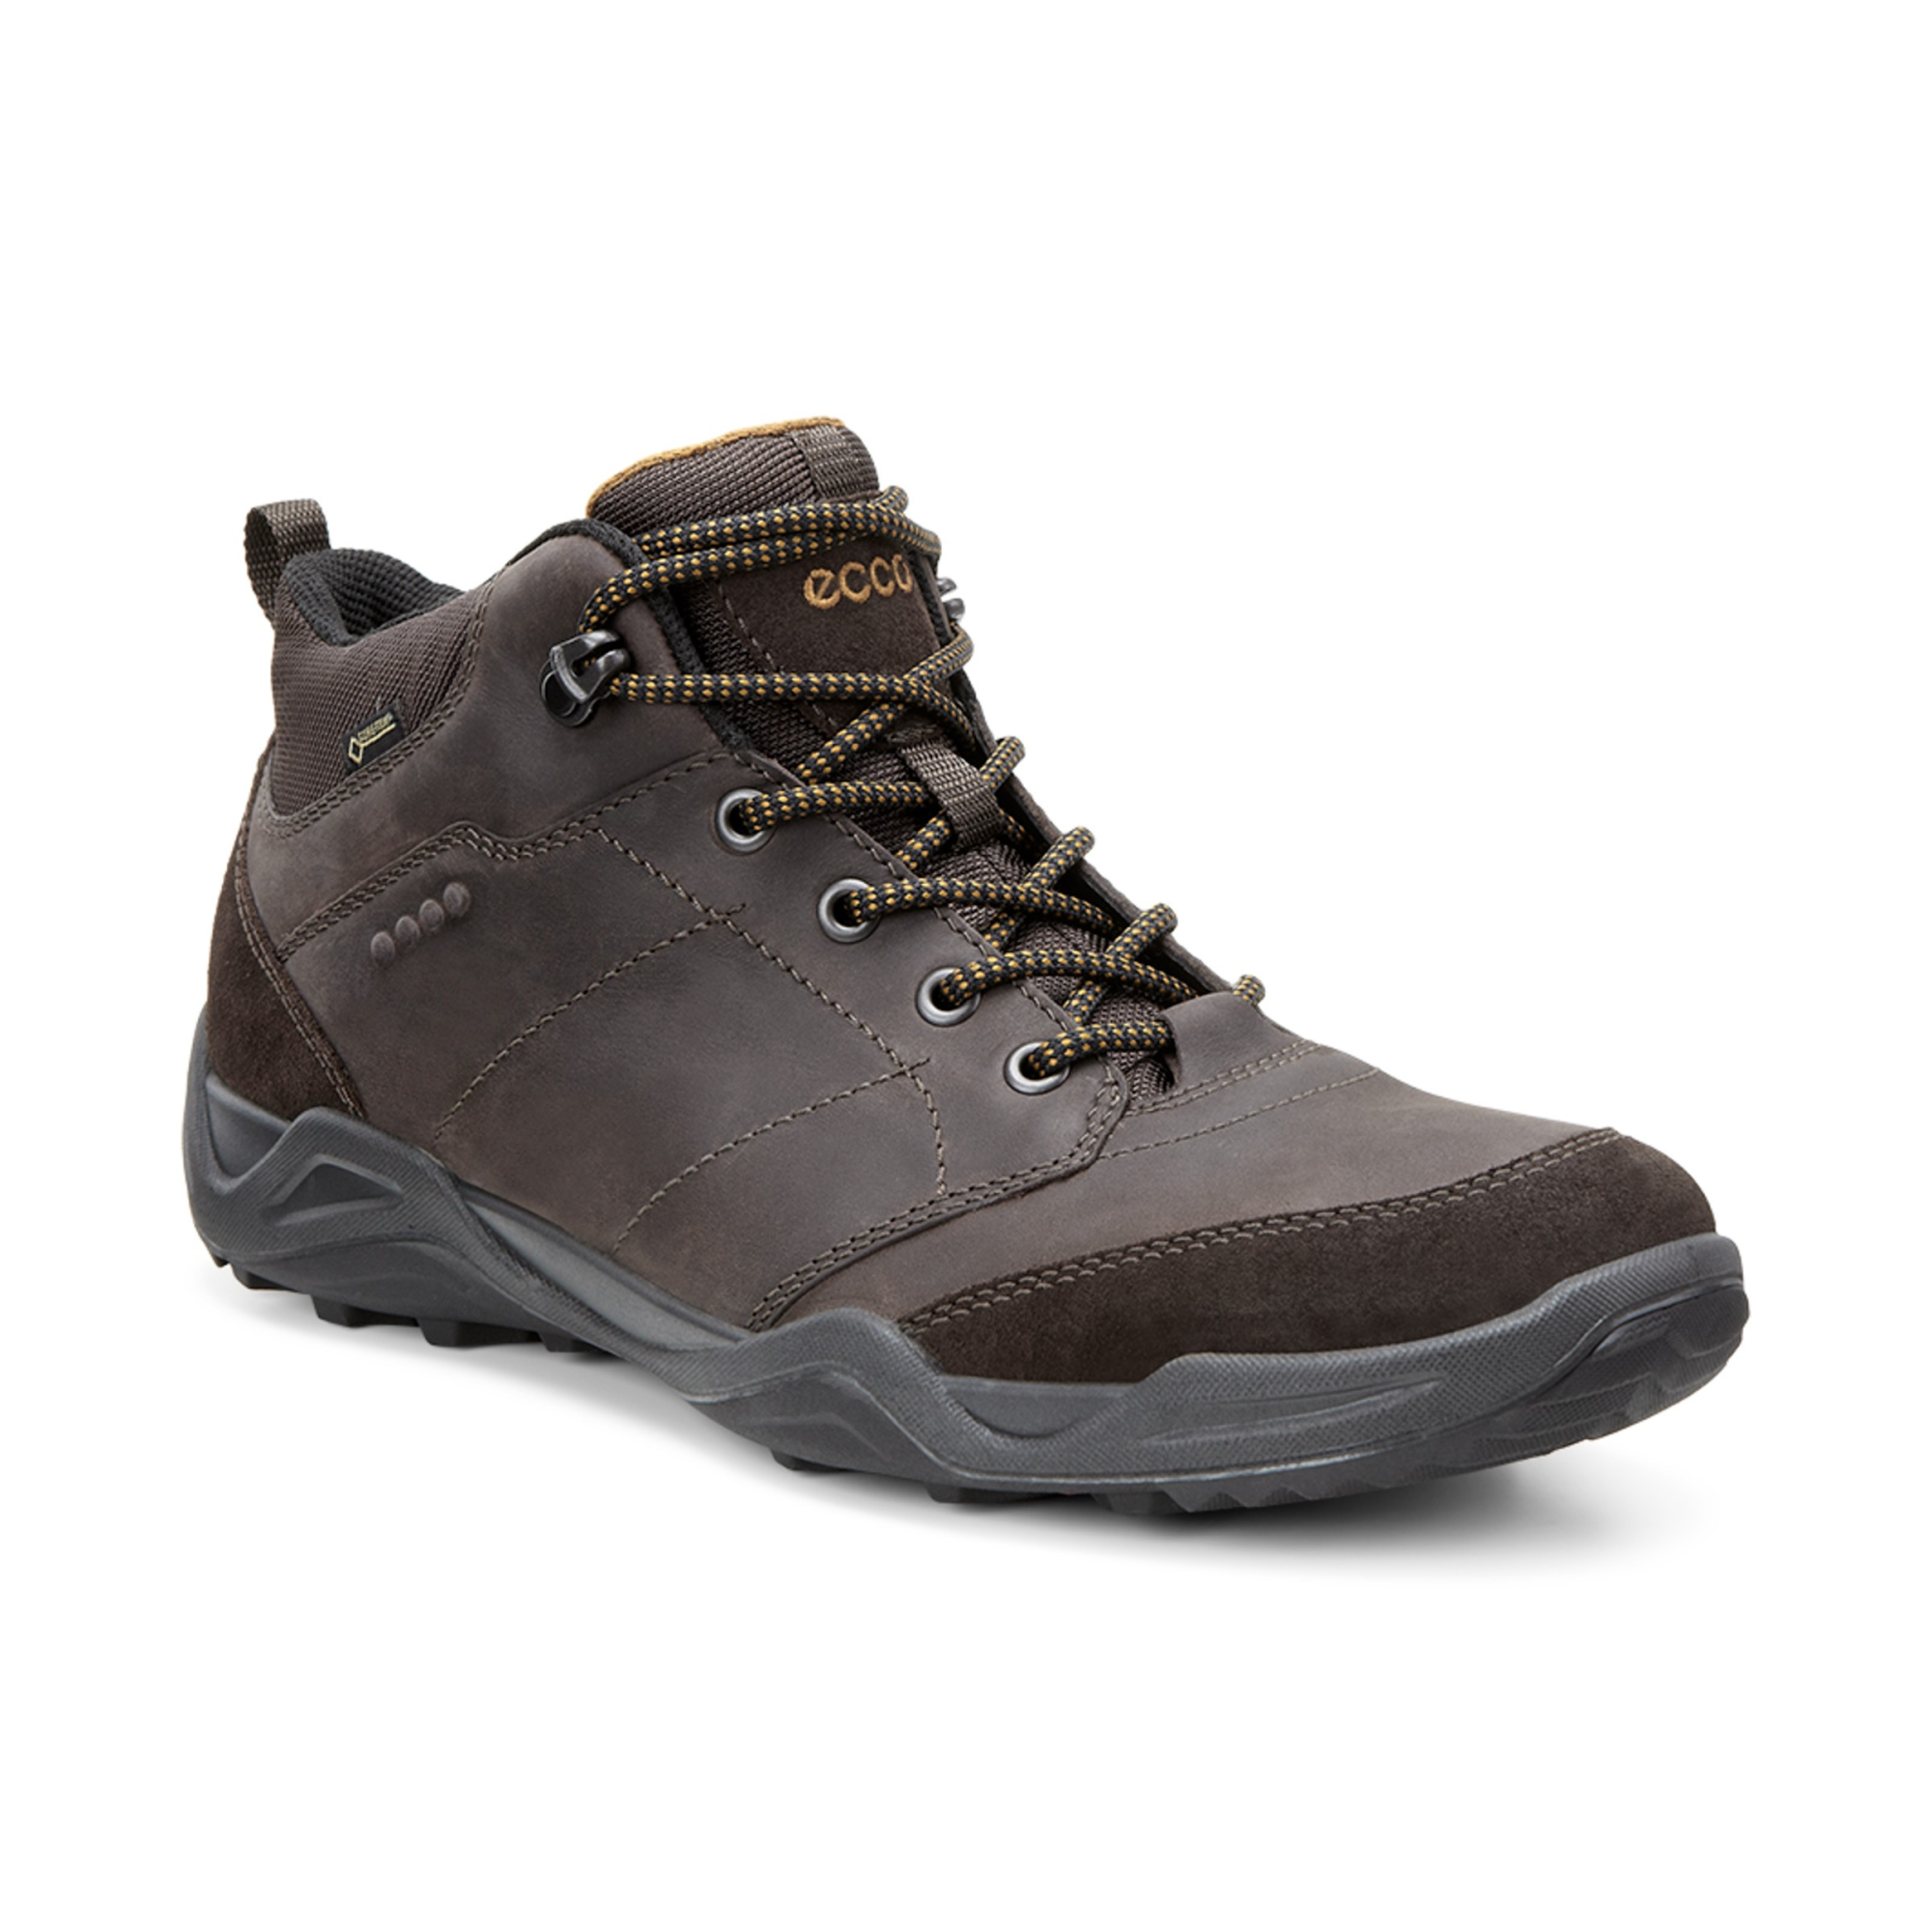 Ecco Mens Sierra II GTX Mid 40 - Products - Veryk Mall - Veryk Mall, many quick response, safe your money!